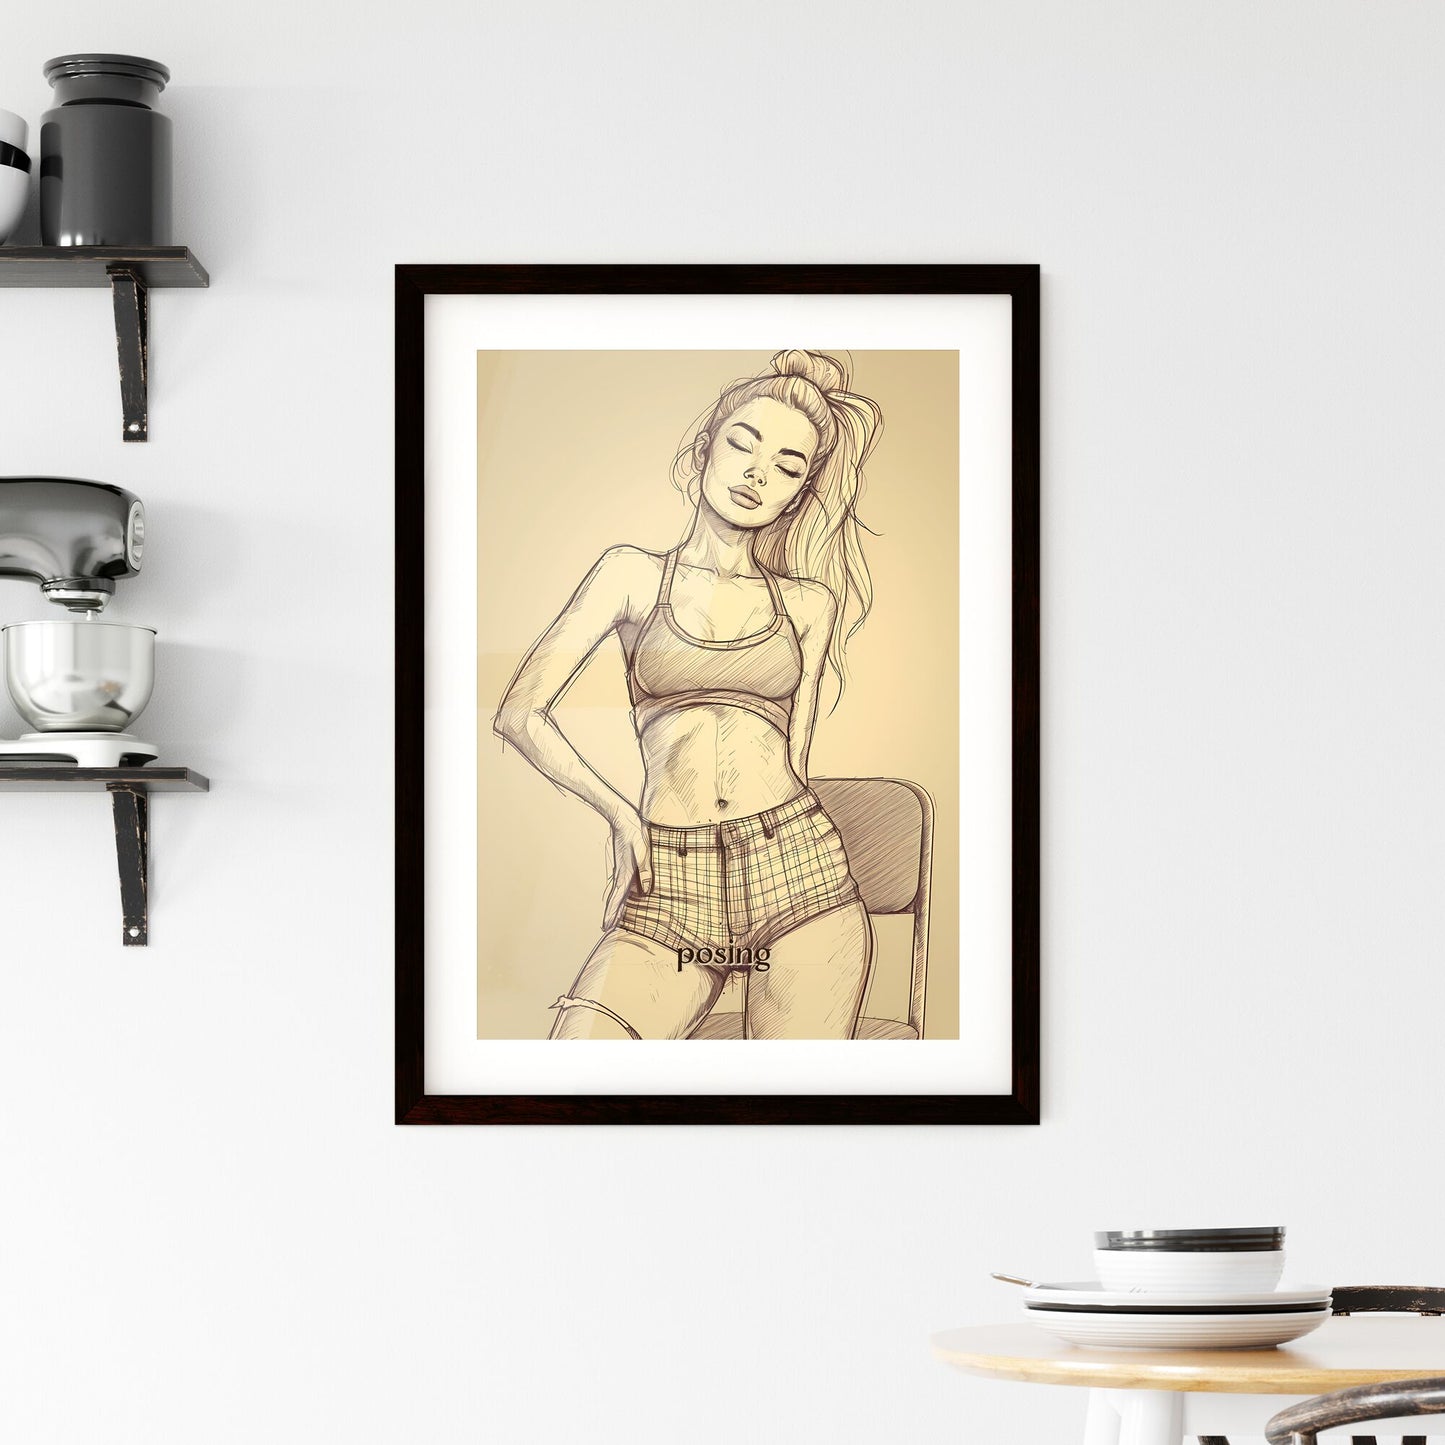 posing, A Poster of a drawing of a woman Default Title